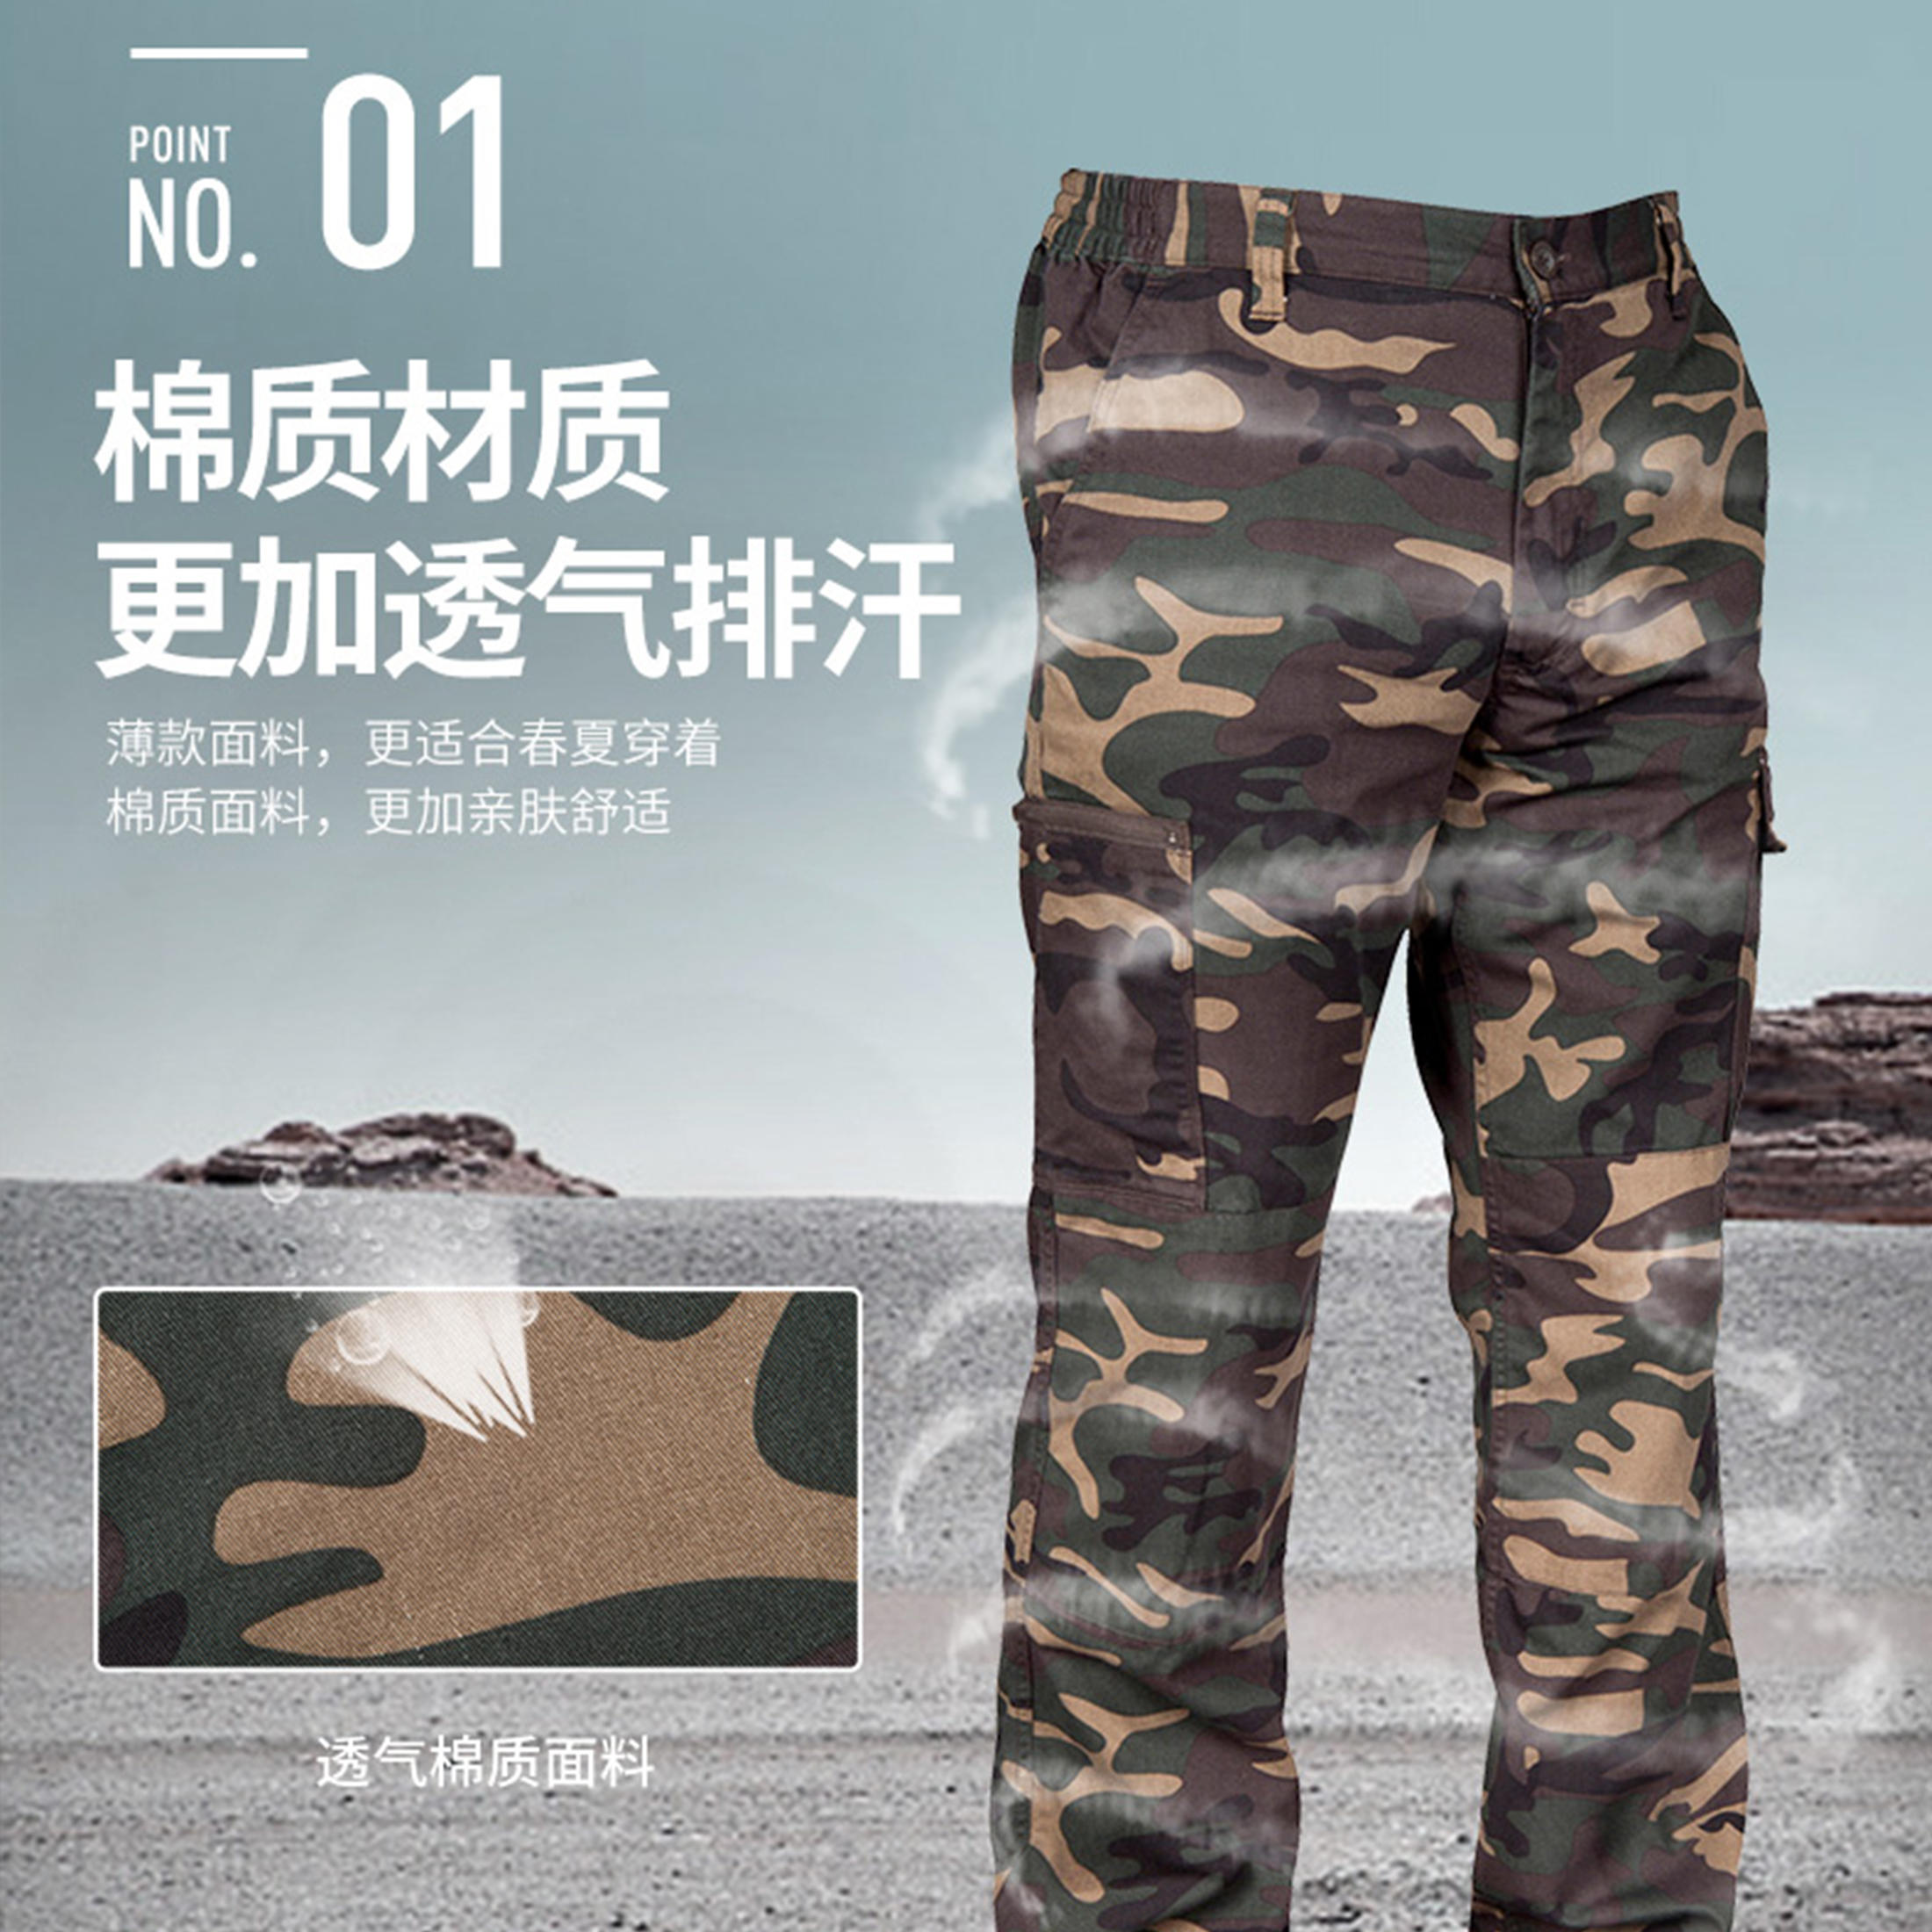 Cheap City Military Tactical Pants Men SWAT Combat Army Trousers Men Many  Pockets Waterproof Wear Resistant Casual Cargo Pants 2020  Joom